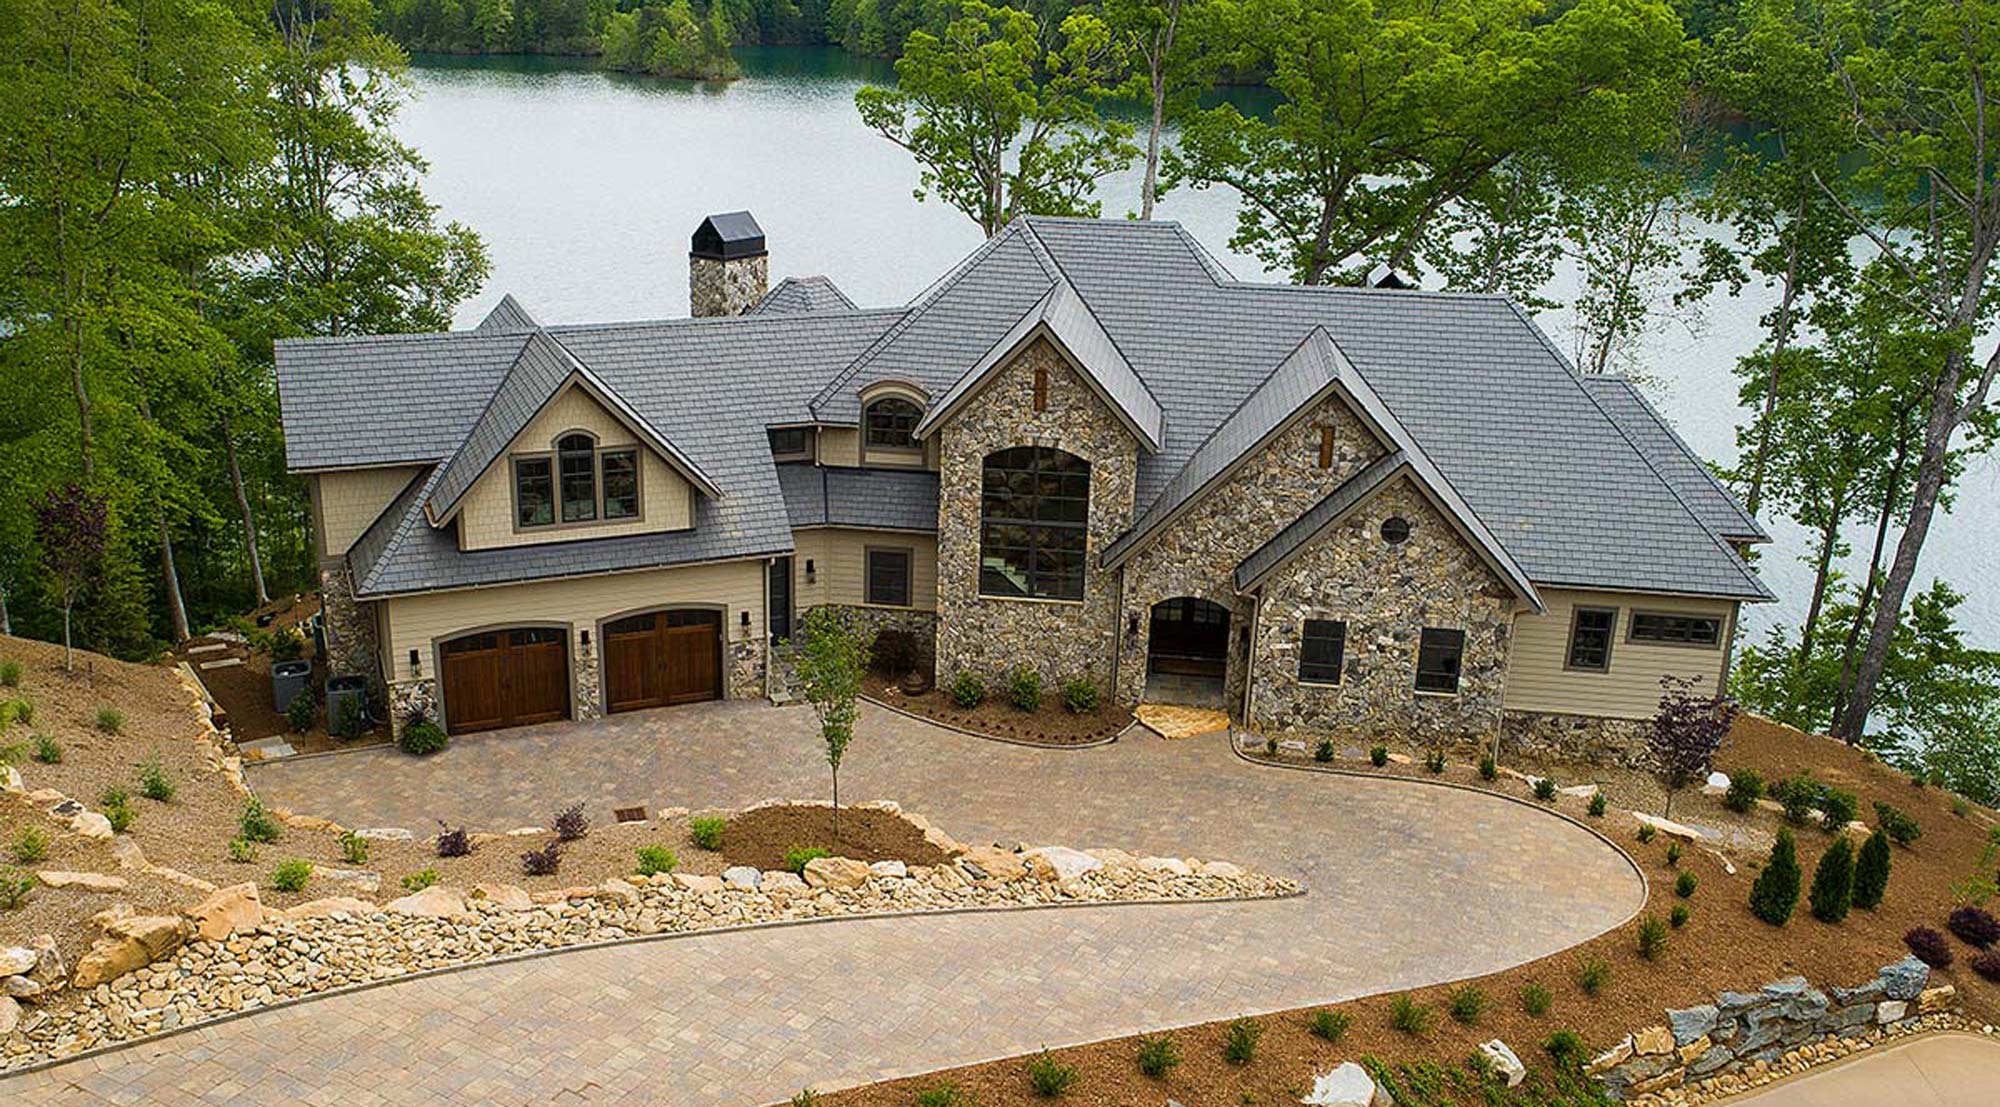 Design Elite architectural innovation in Upstate South Carolina our work lake residential hero image 3 - Lake Residential